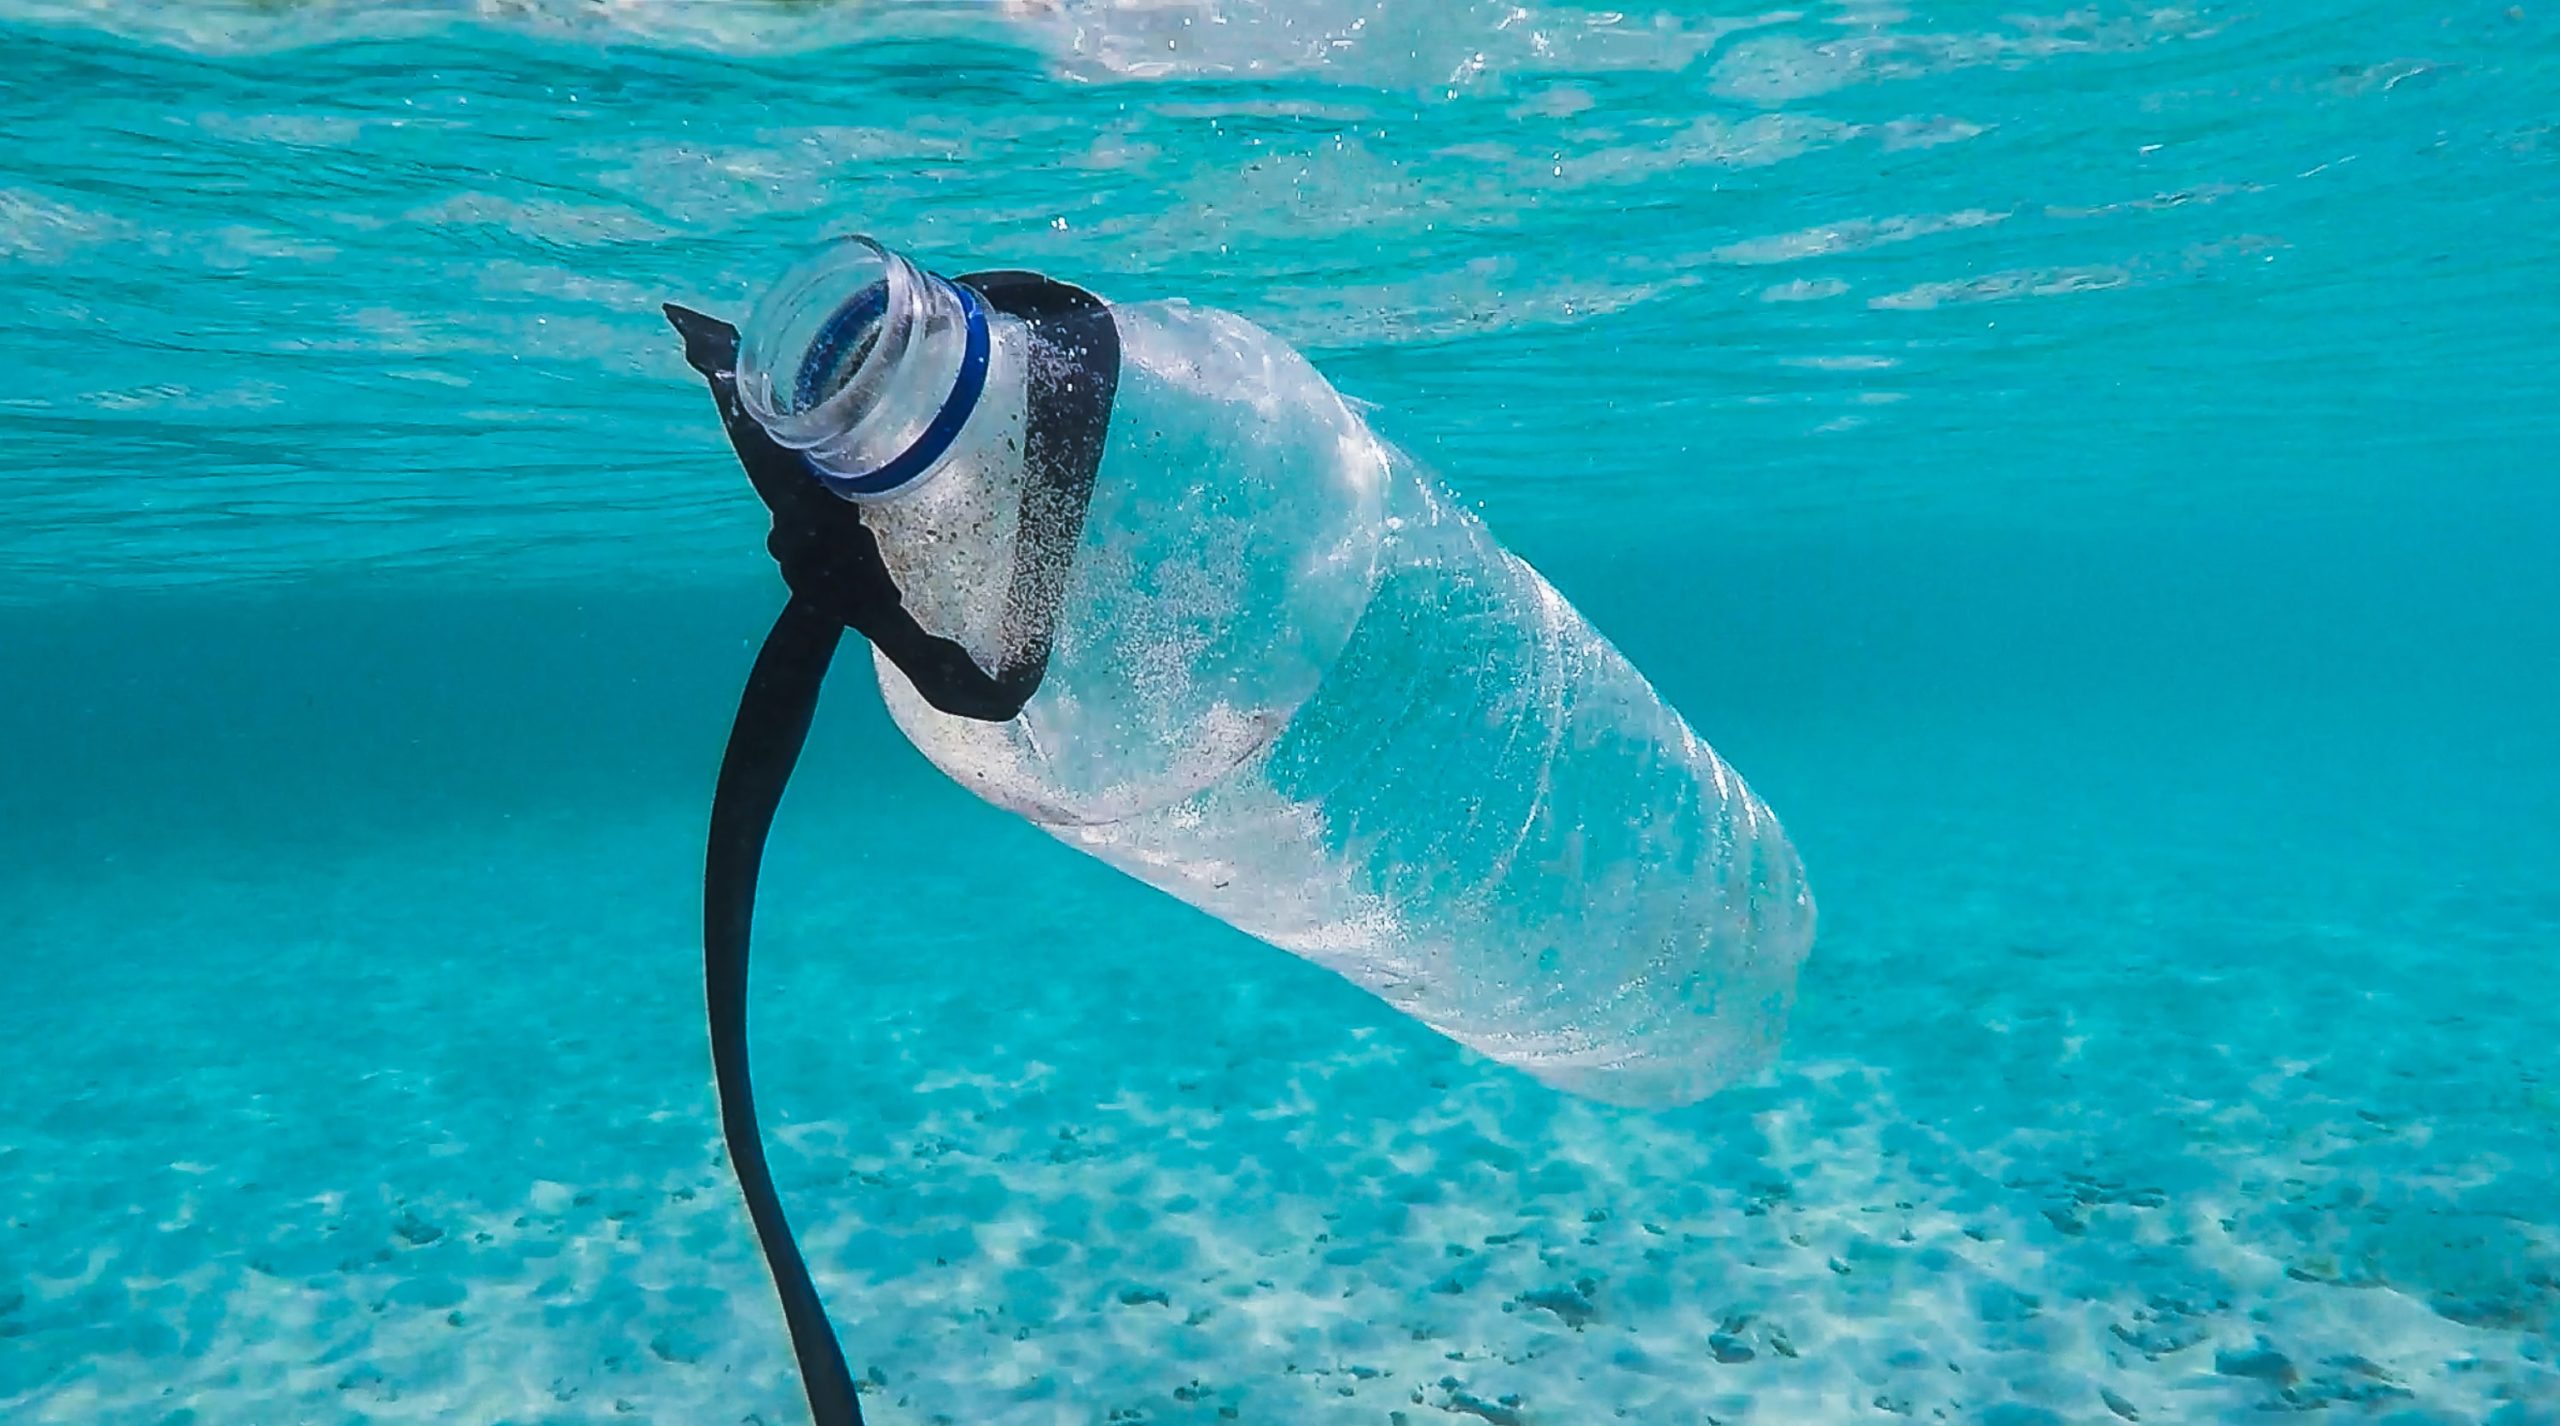 The image shows a plastic bottle floating within the ocean.